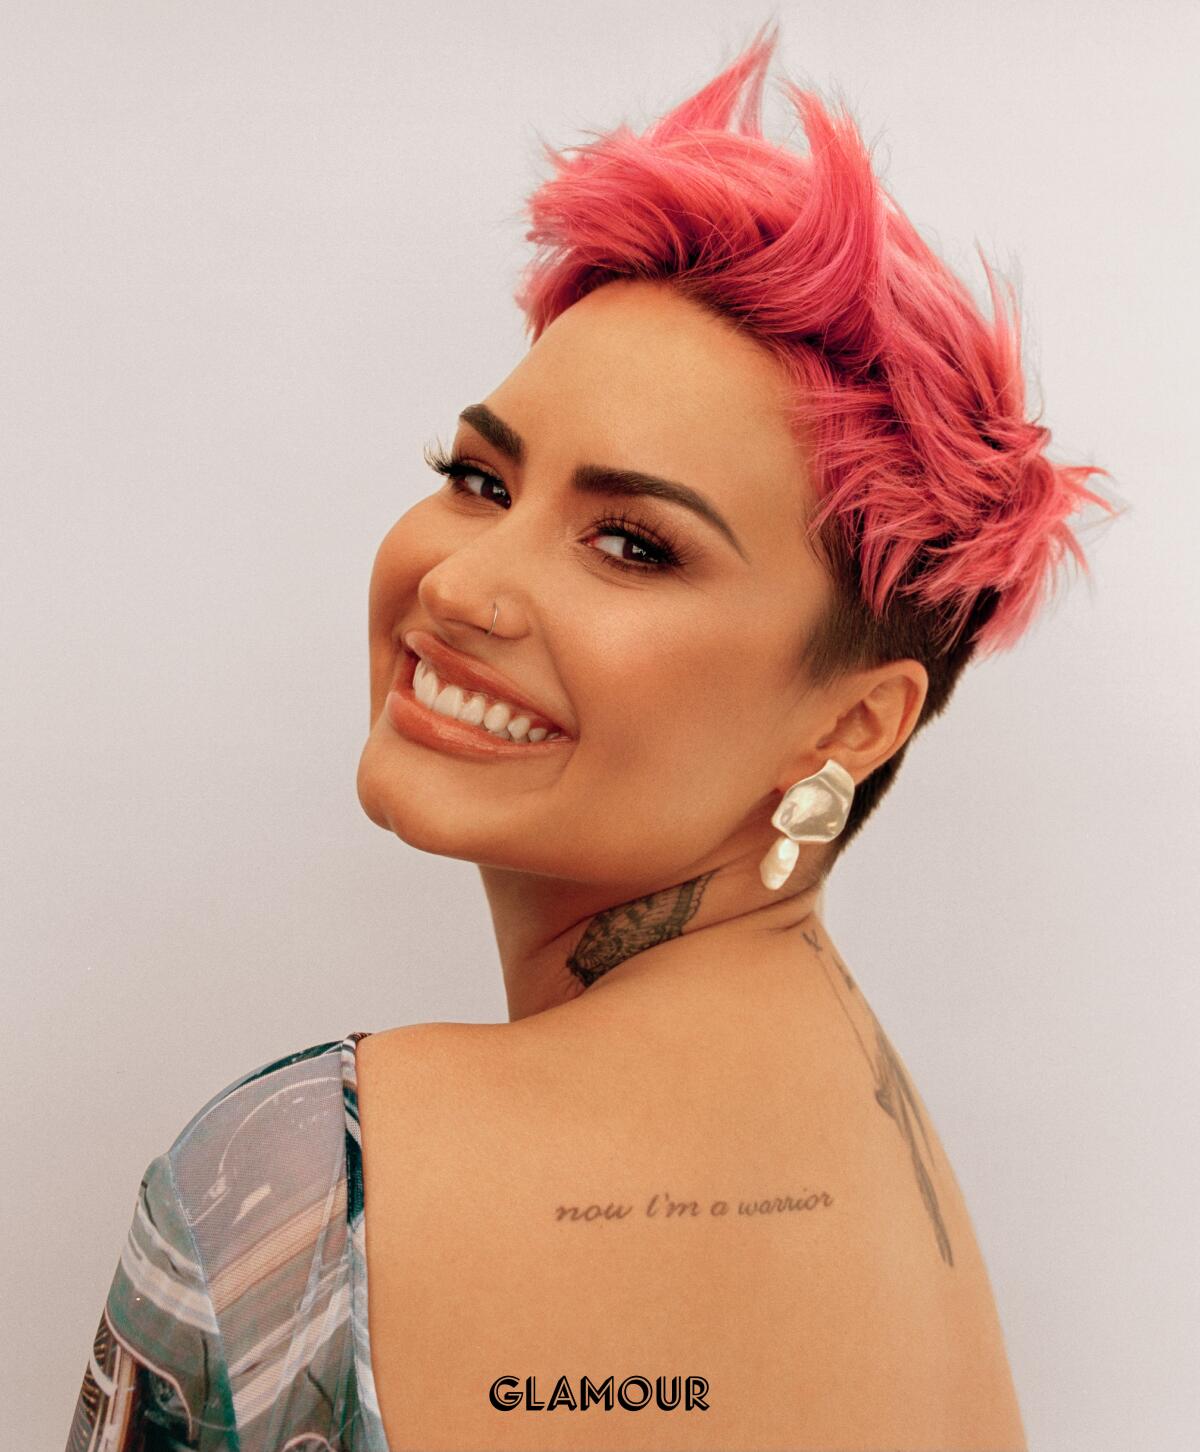 DEMI LOVATO TALKS SOBRIETY, SEXUALITY, AND SWITCHING GEARS FROM POP PRINCESS TO ROCK STAR